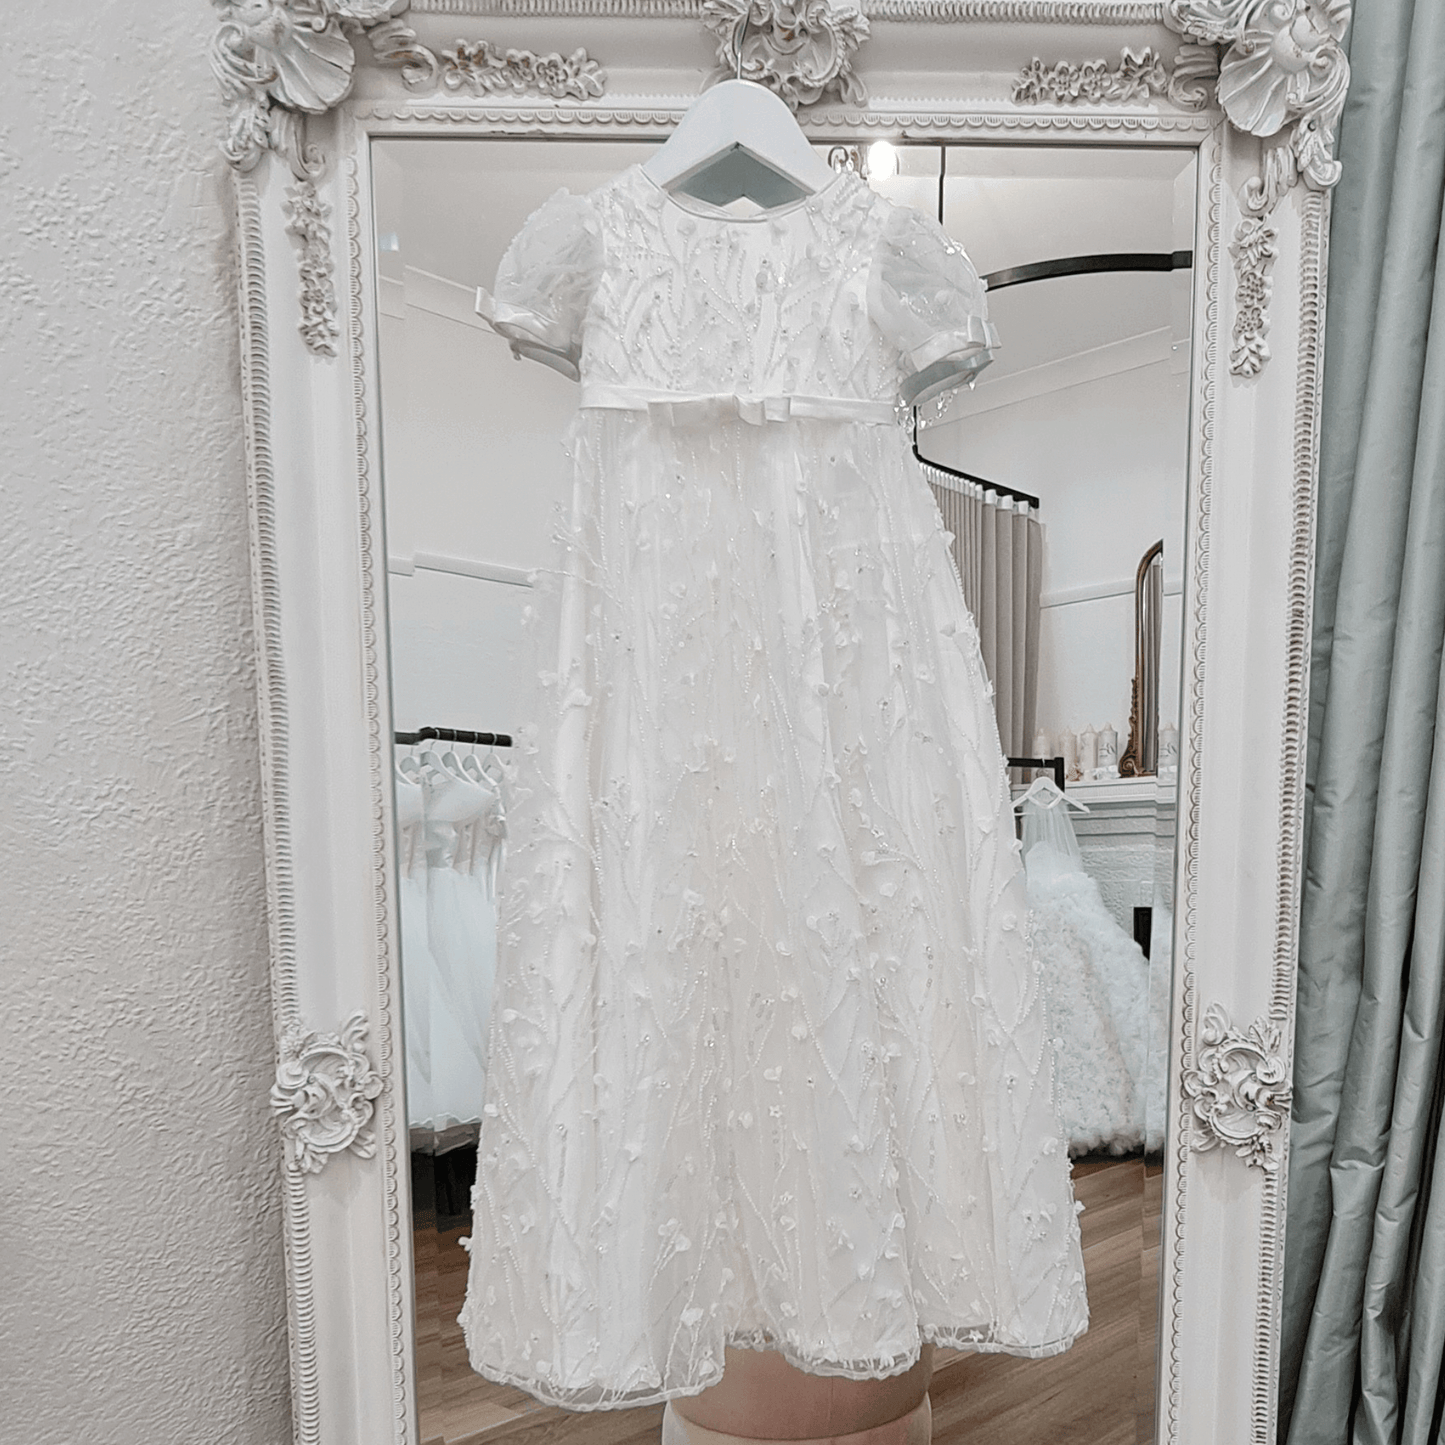 Christening Gown - Embroidered Floral Lace - sz 1– Lilys Attic